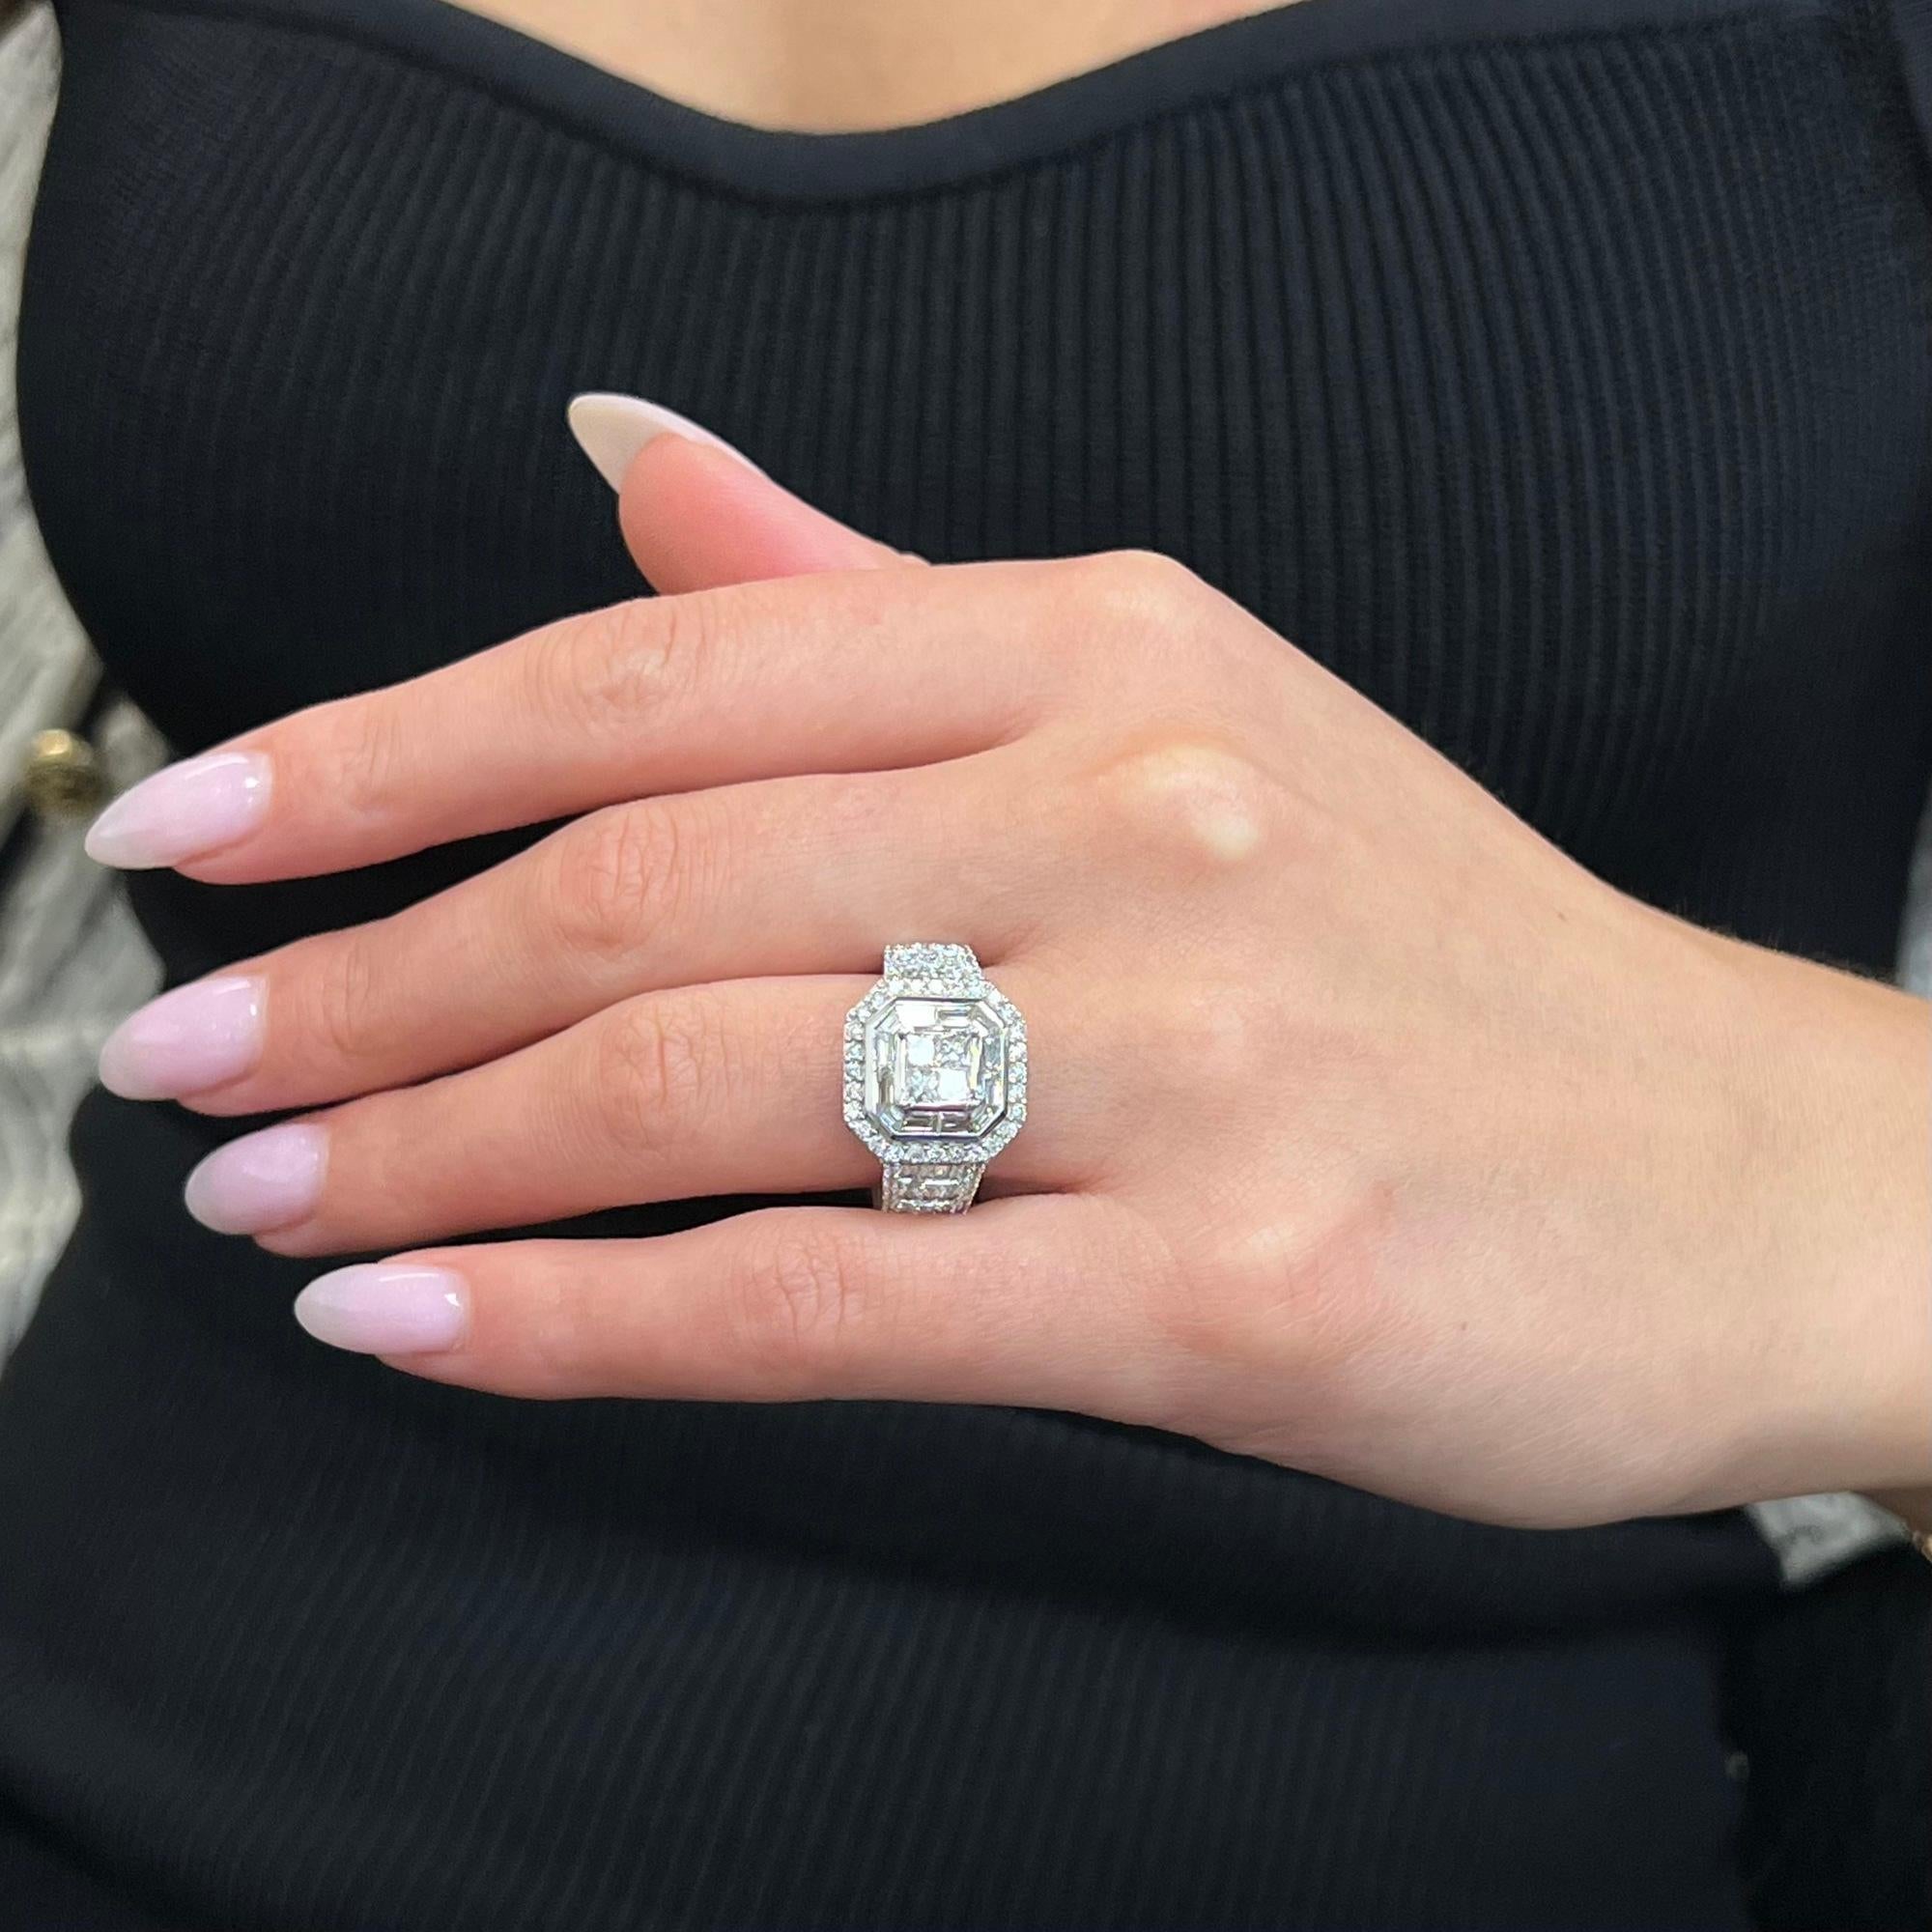 Rachel Koen 2.00cttw Diamond Halo Engagement Ring 14K White Gold In Excellent Condition For Sale In New York, NY